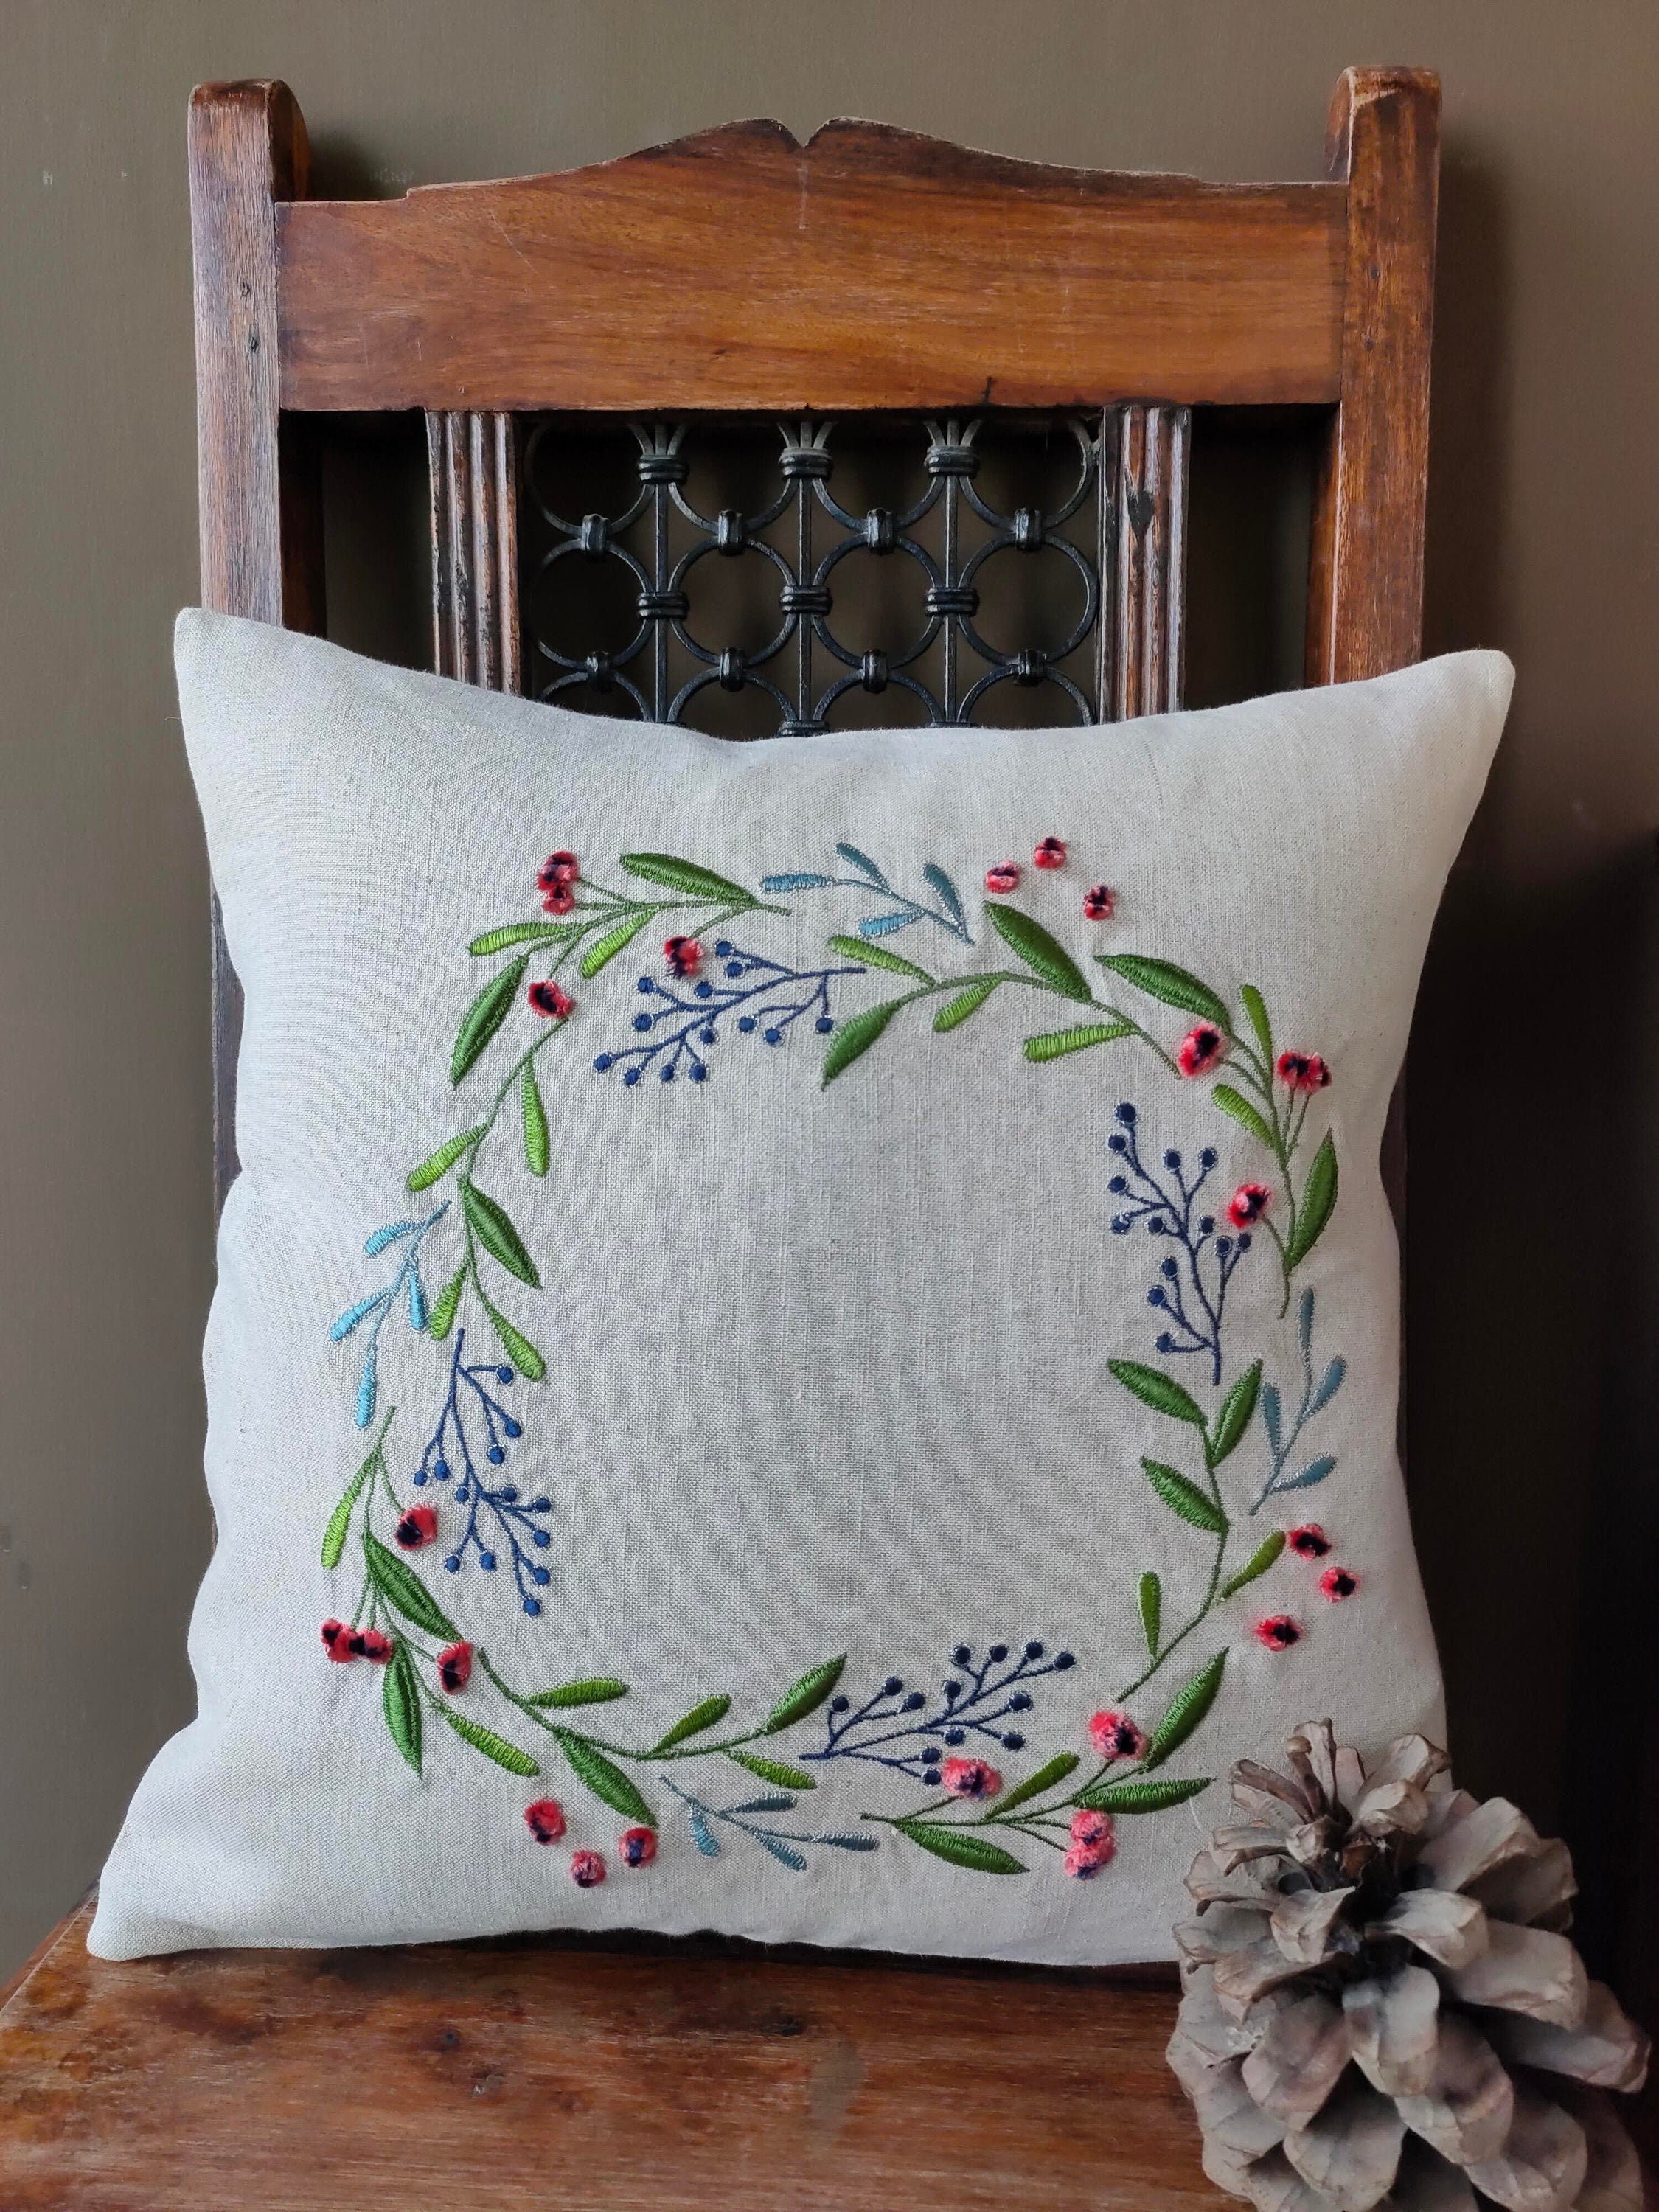 Floral Embroidered Cushion Cover Without Filler, Green Soft